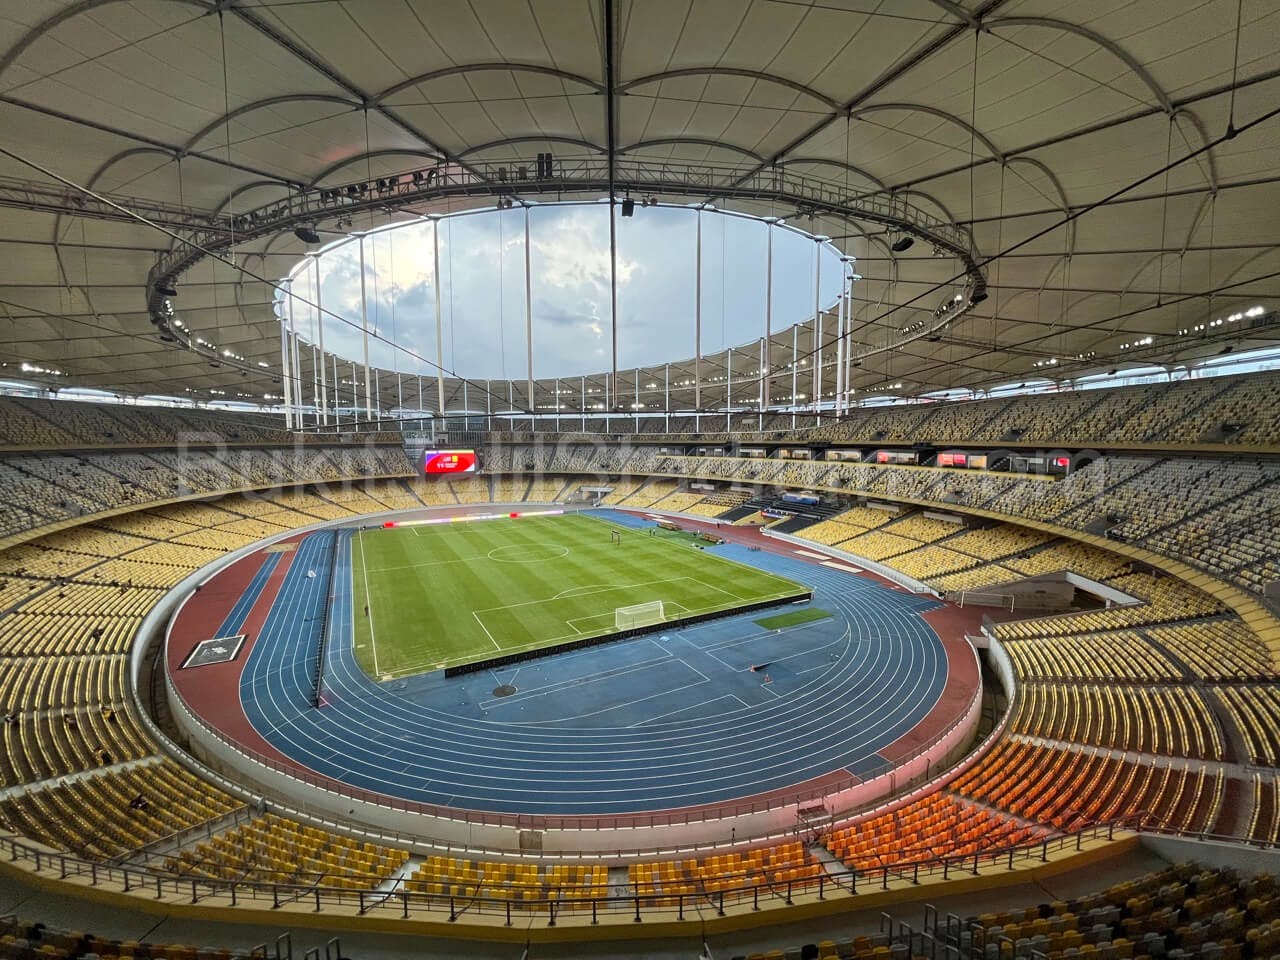 0.5x View of Bukit Jalil field from section 307 of Stadium Bukit Jalil.